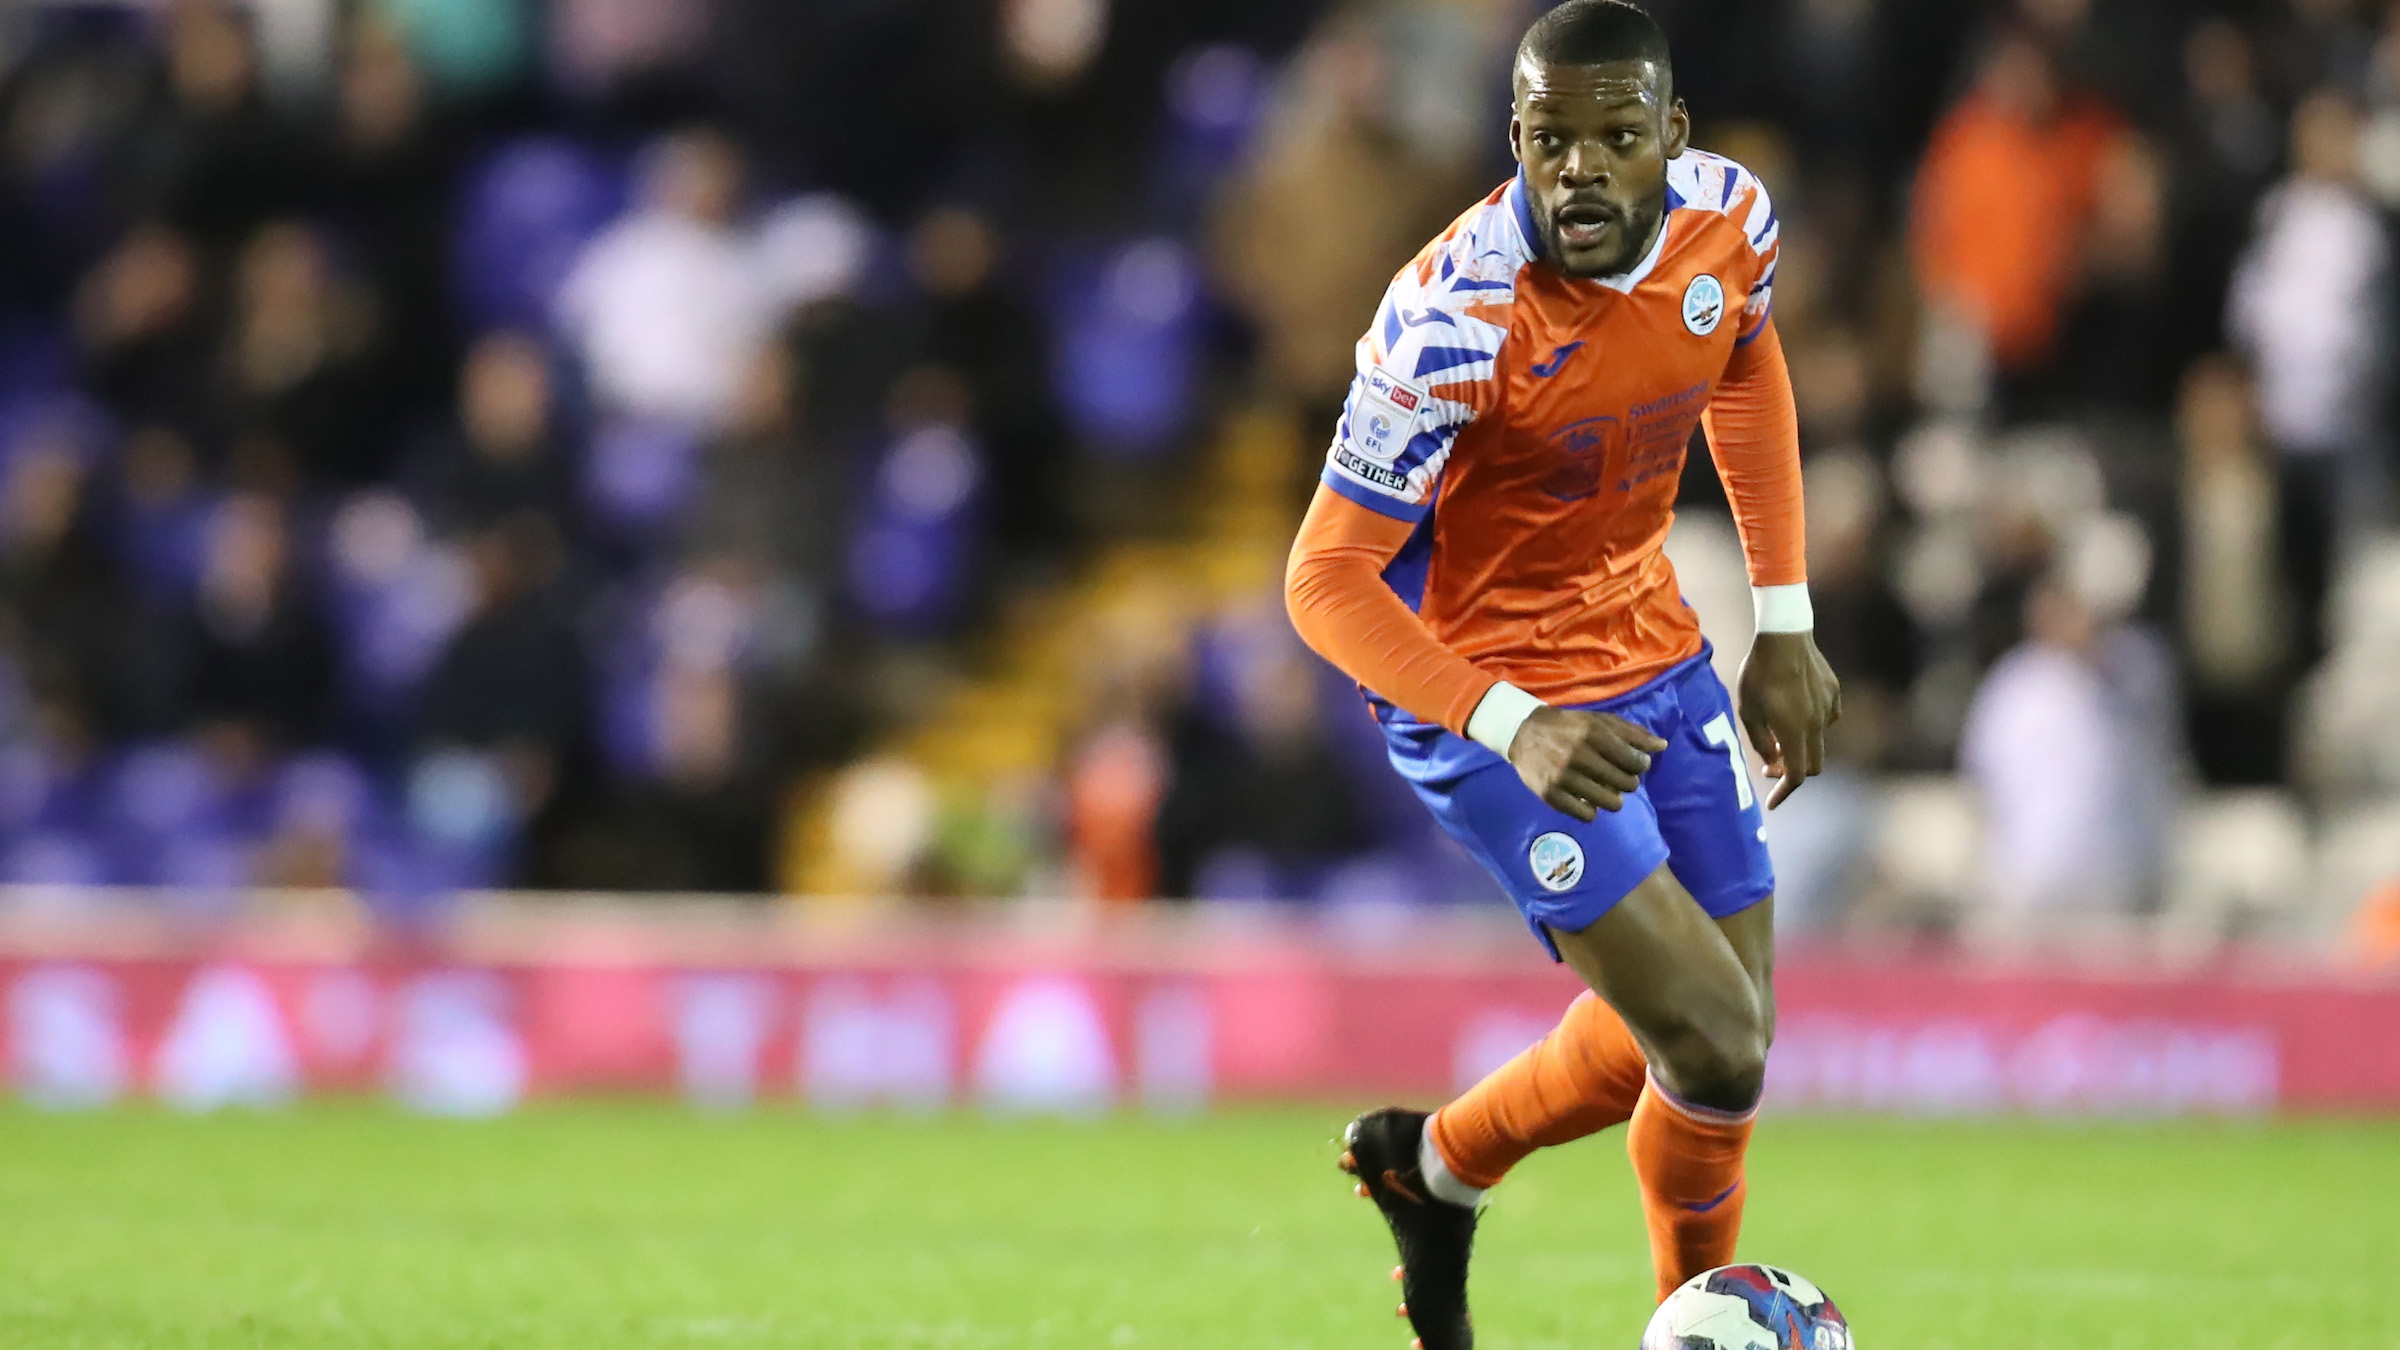 Olivier Ntcham runs with the ball against Birmingham